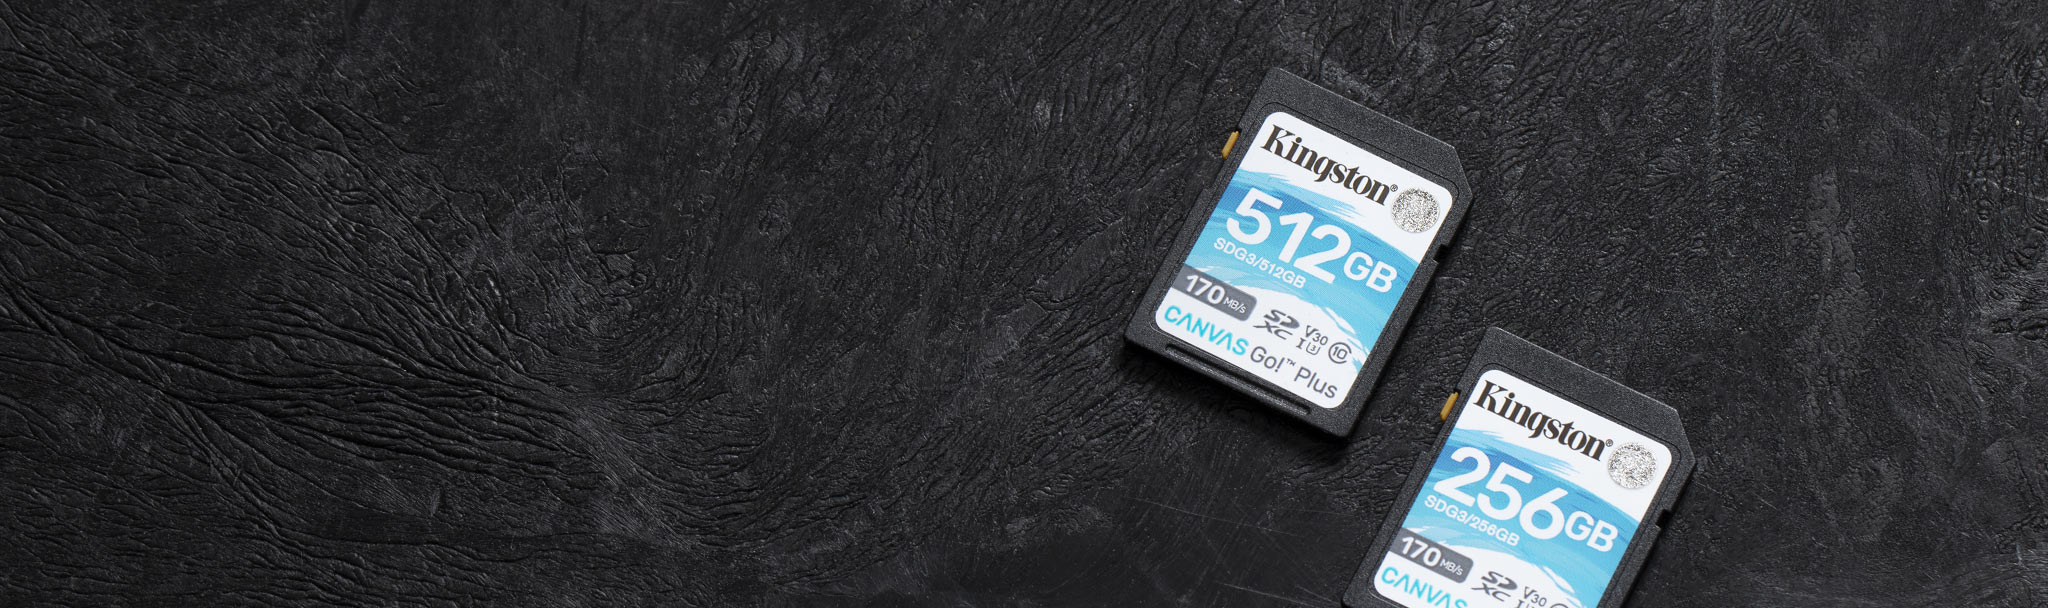 80MBs Works with Kingston Professional Kingston 64GB for LG H525N MicroSDXC Card Custom Verified by SanFlash. 